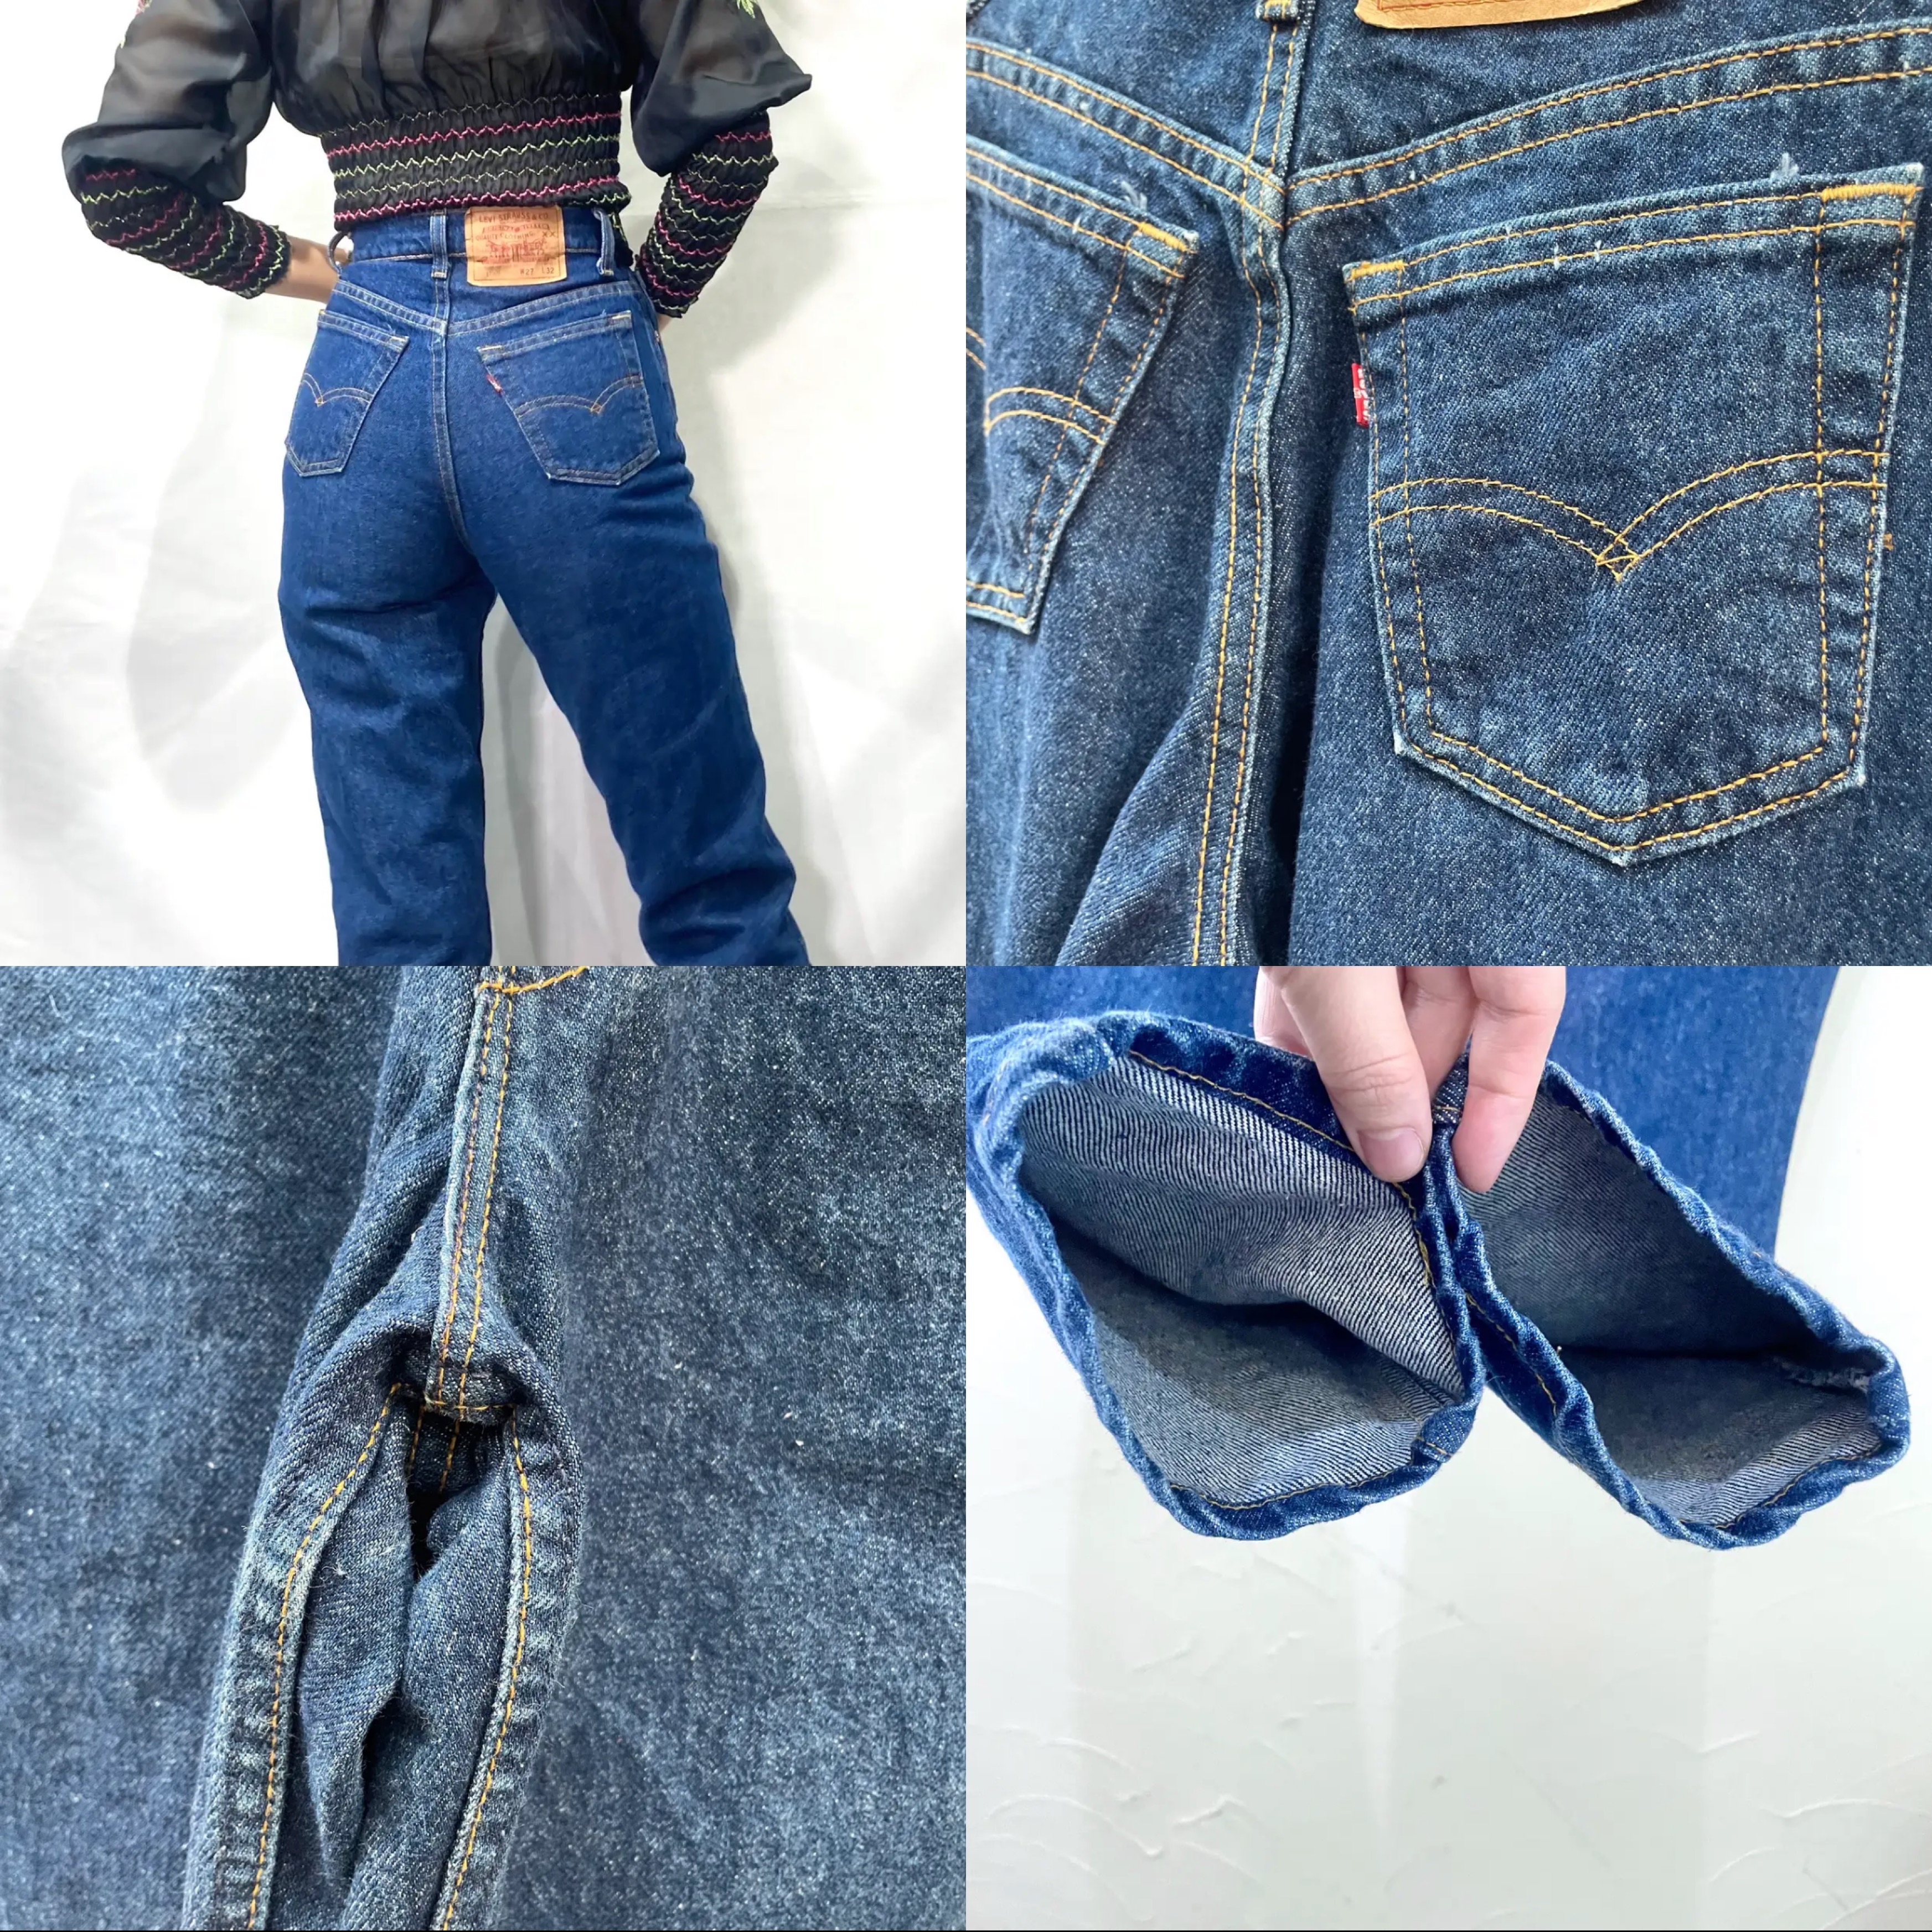 90s made in USA Levi's 17505 denim pants | Vintage.City